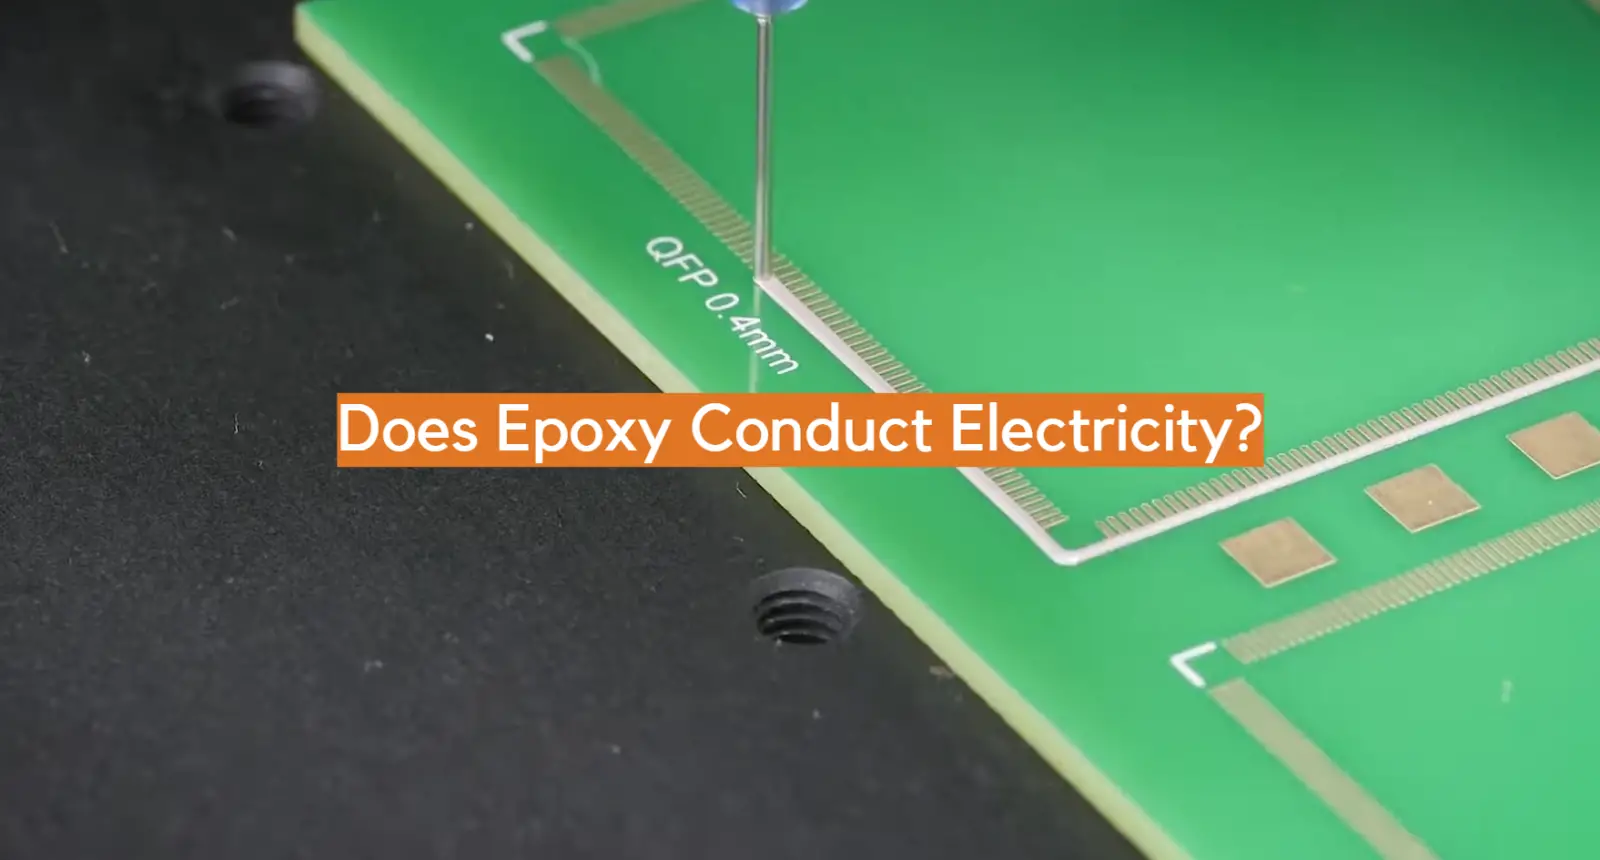 Does Epoxy Conduct Electricity?